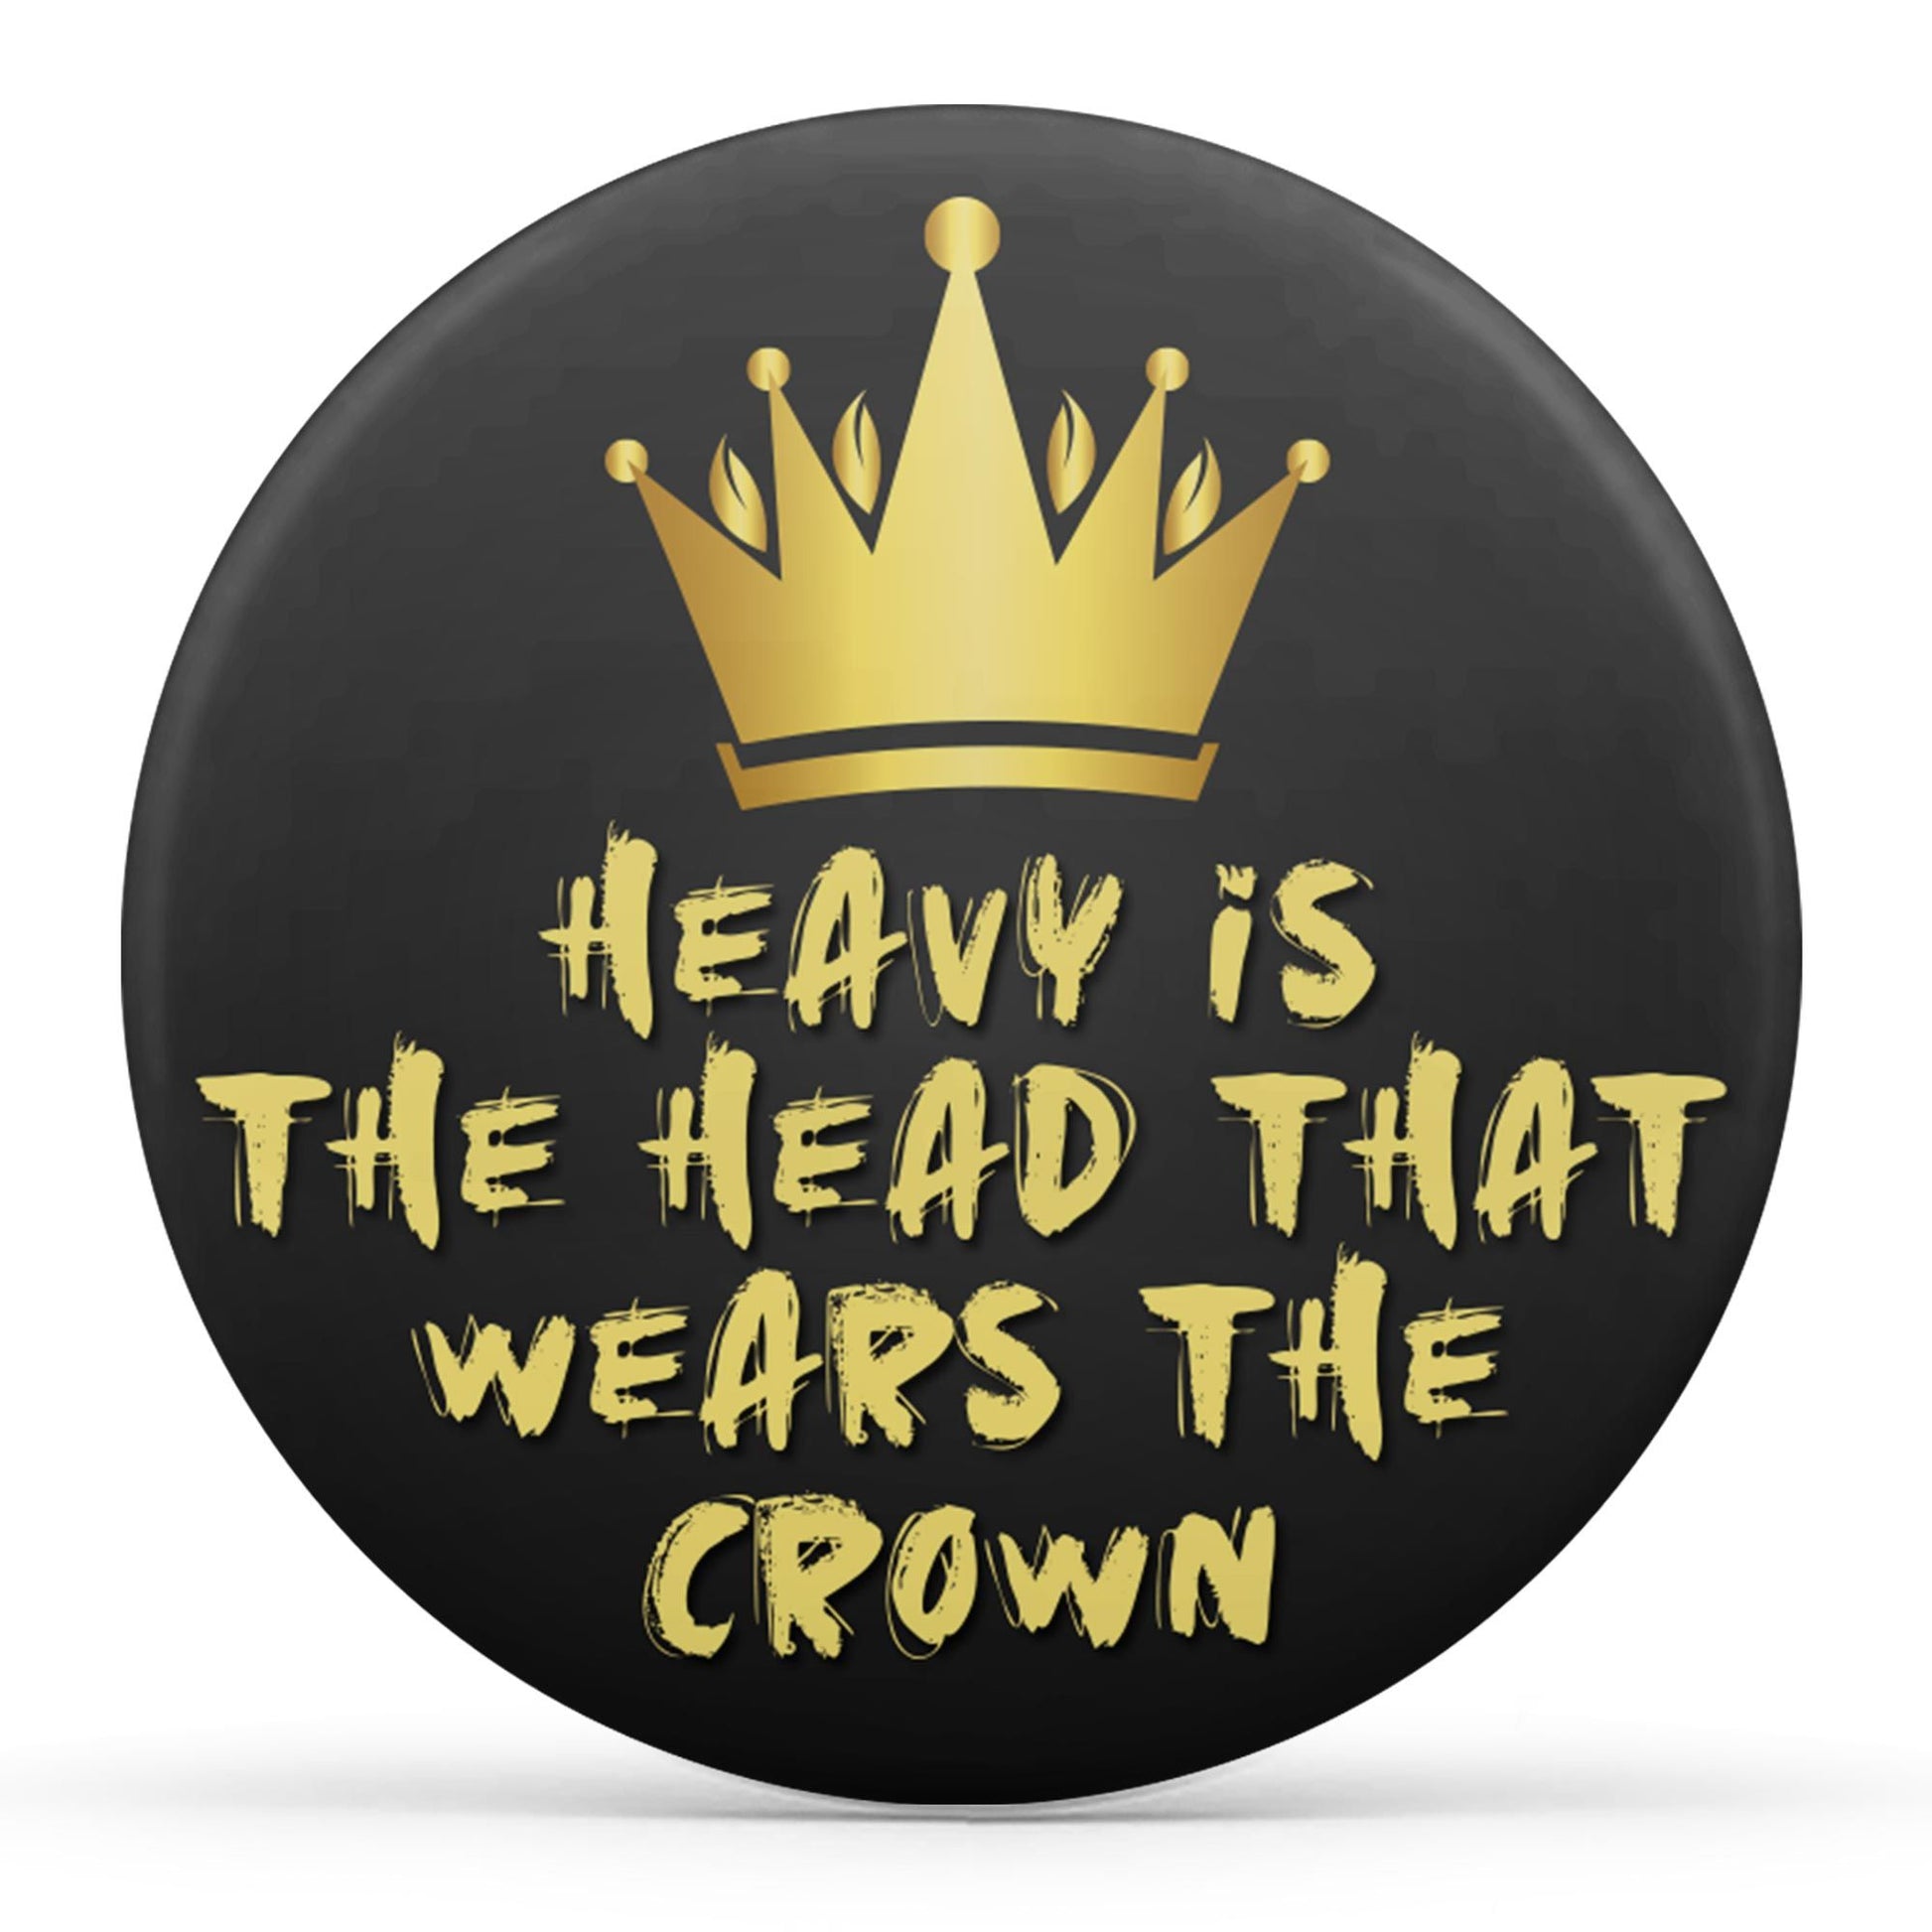 Heavy Is the Head That Wears The Crown Image